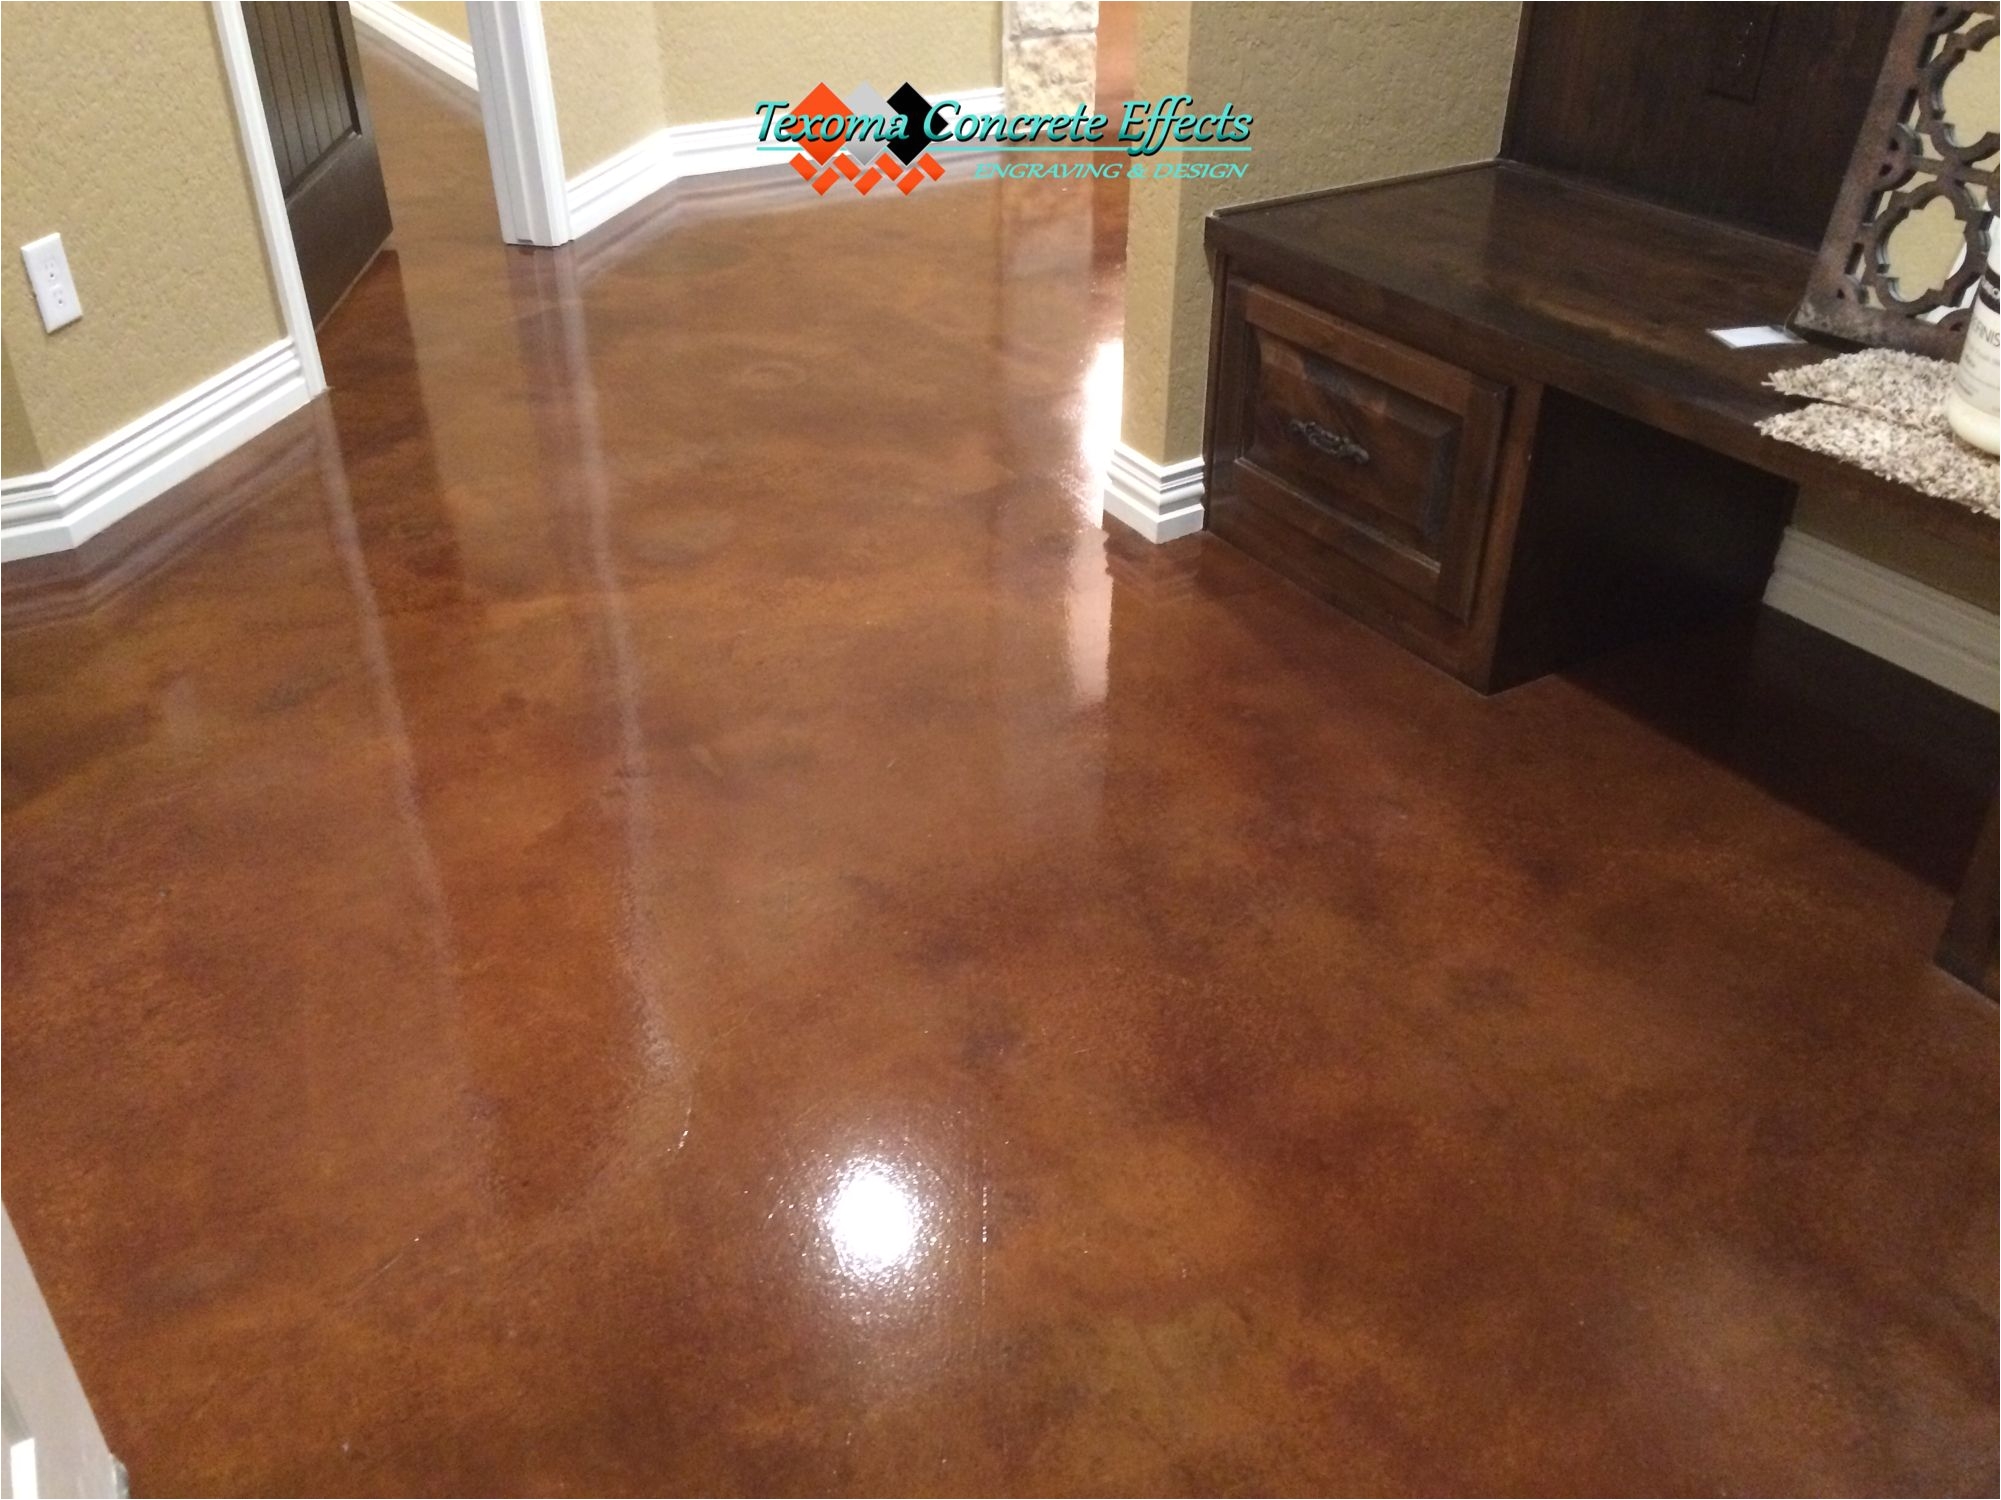 acid stained concrete floor by texoma concrete effects in wichita falls tx